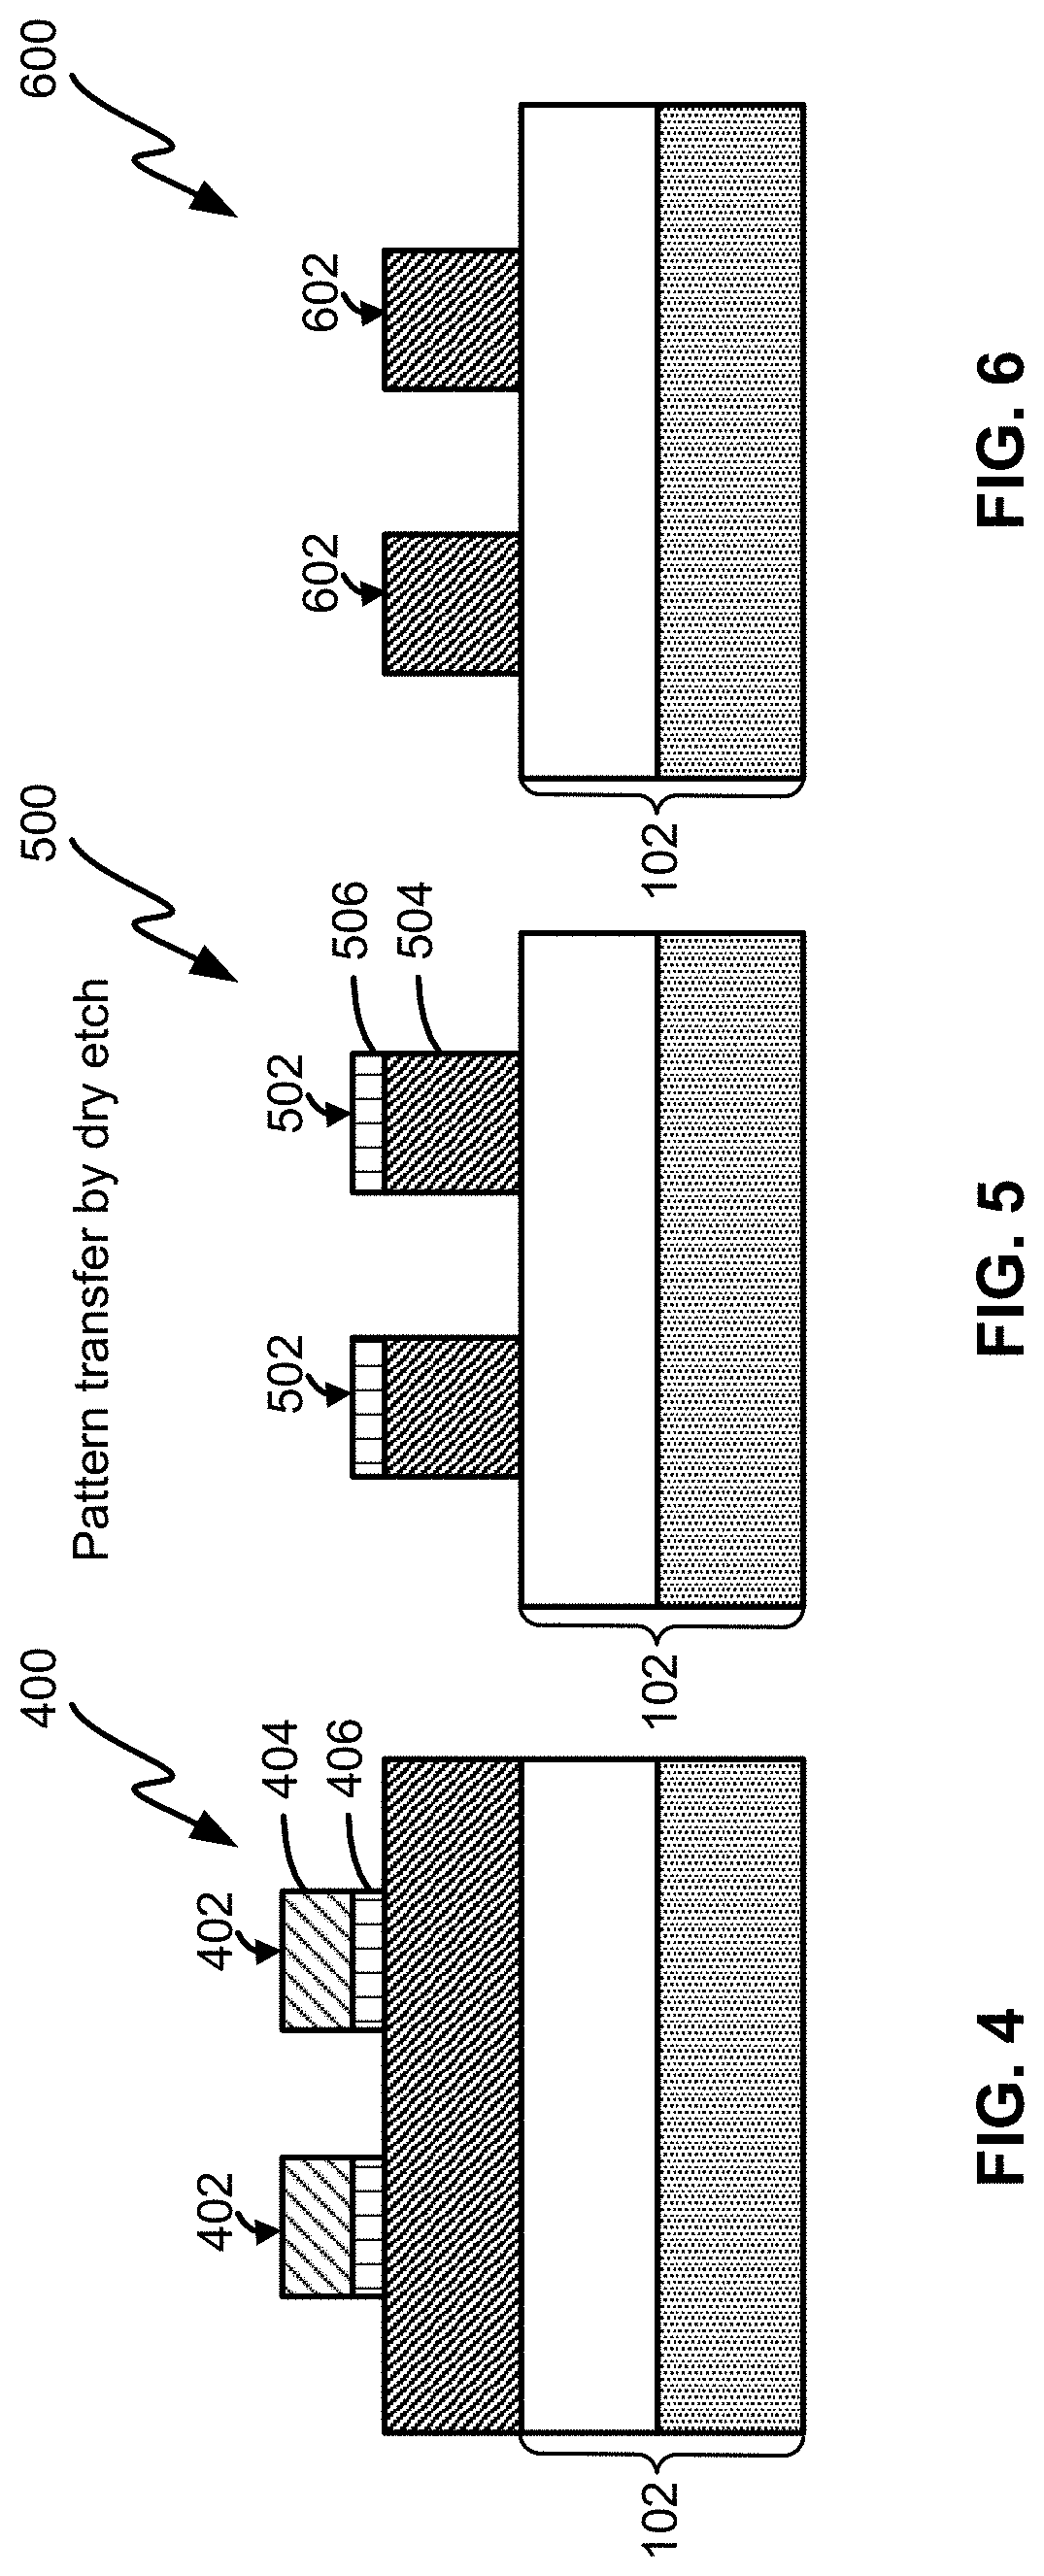 Structure including a photoresist underlayer and method of forming same